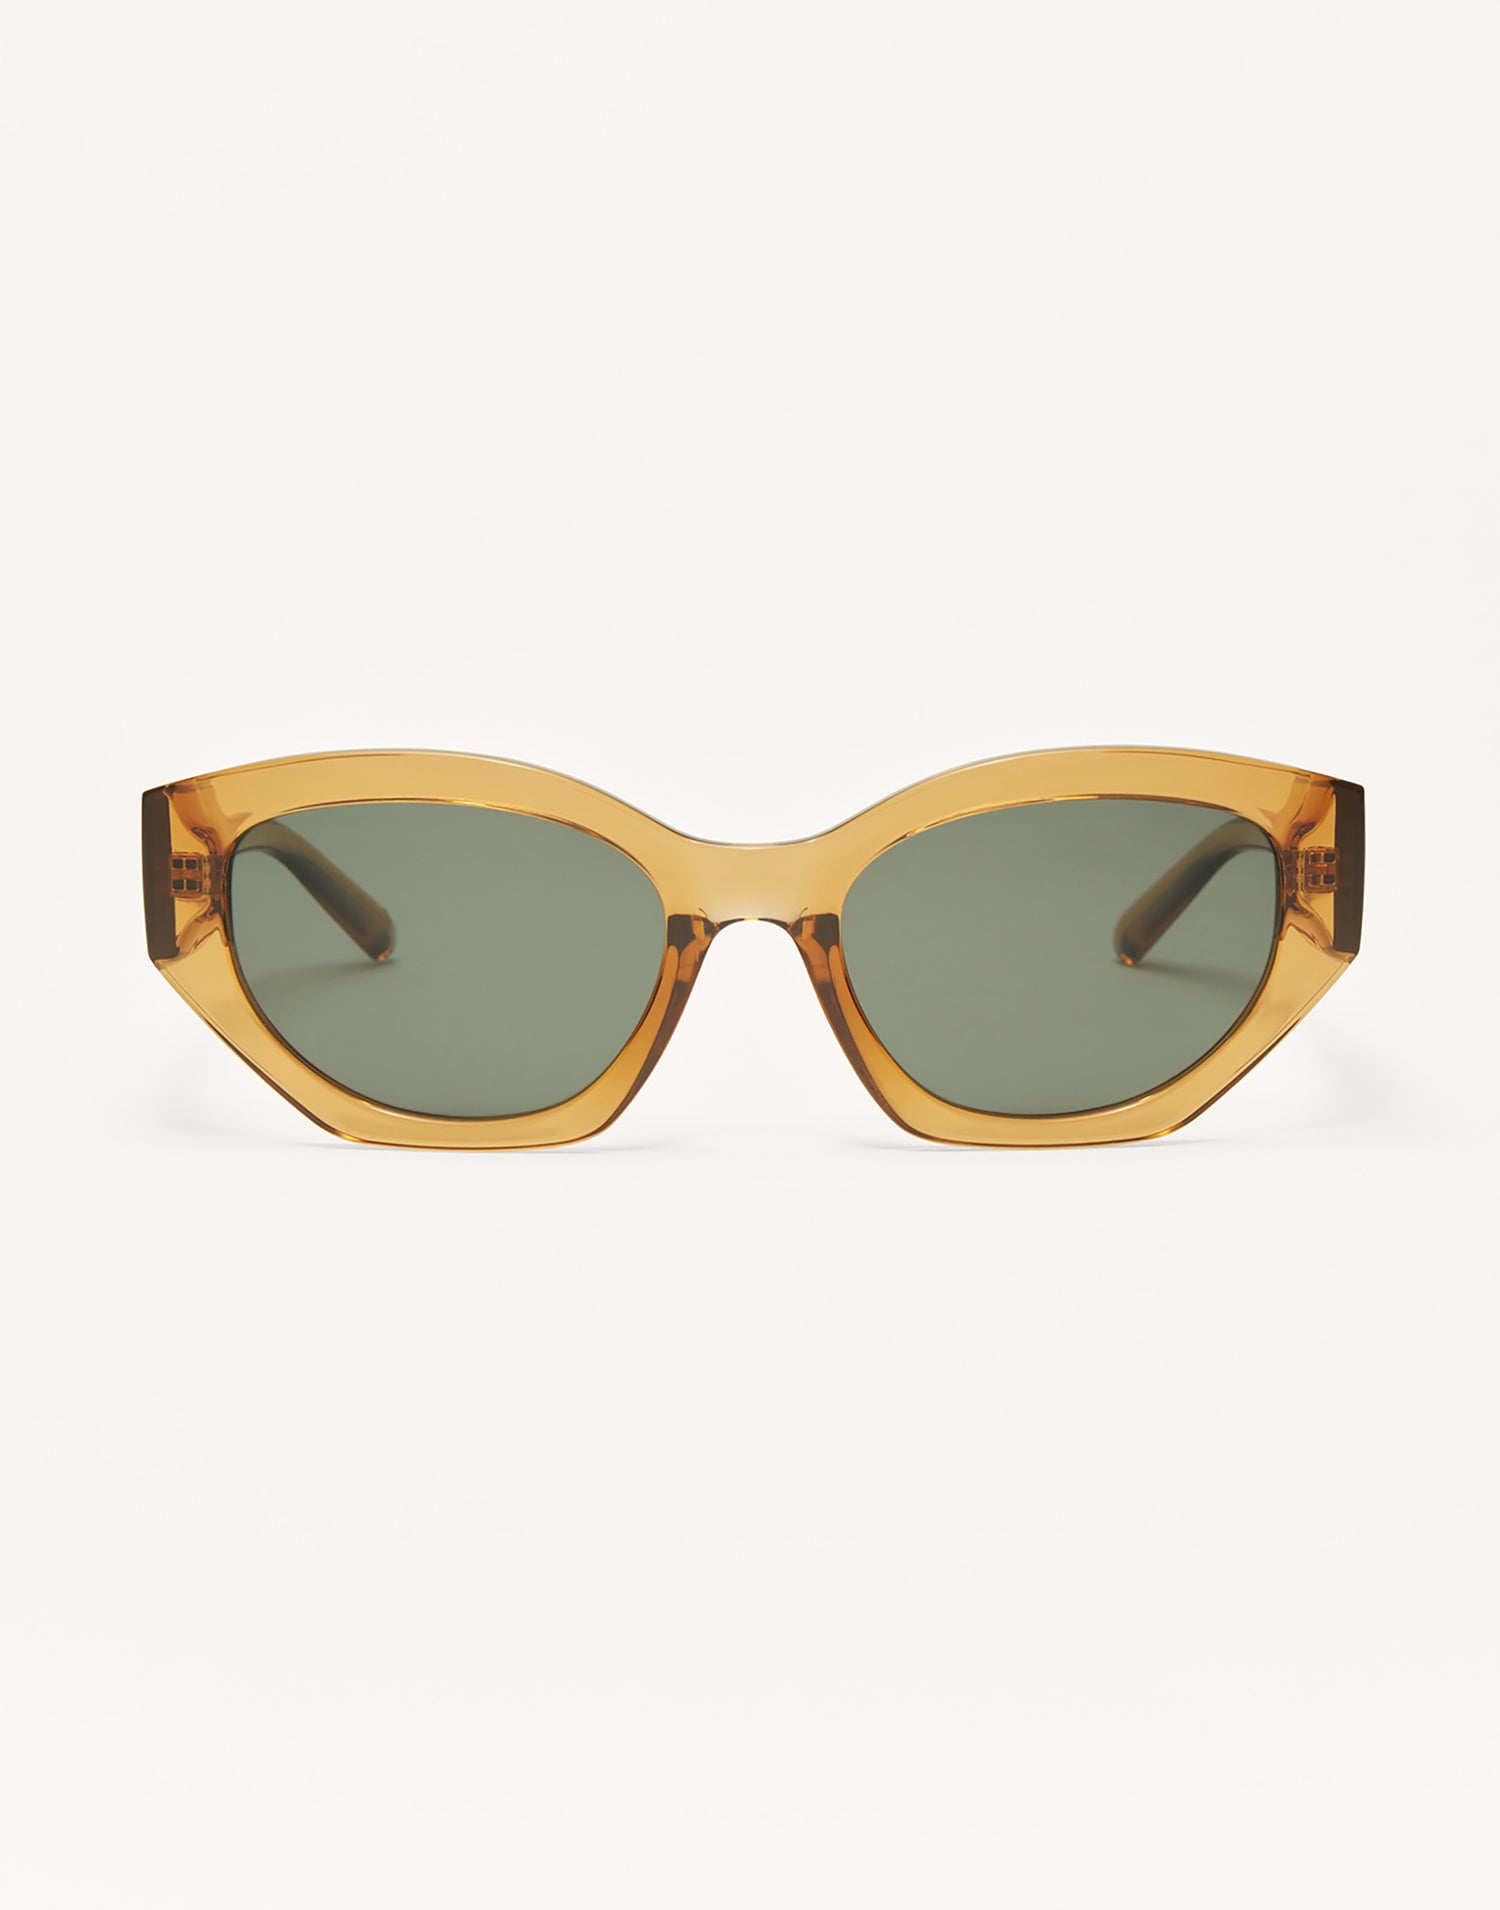 Love Sick Sunglasses by Z Supply in Gold - Front View